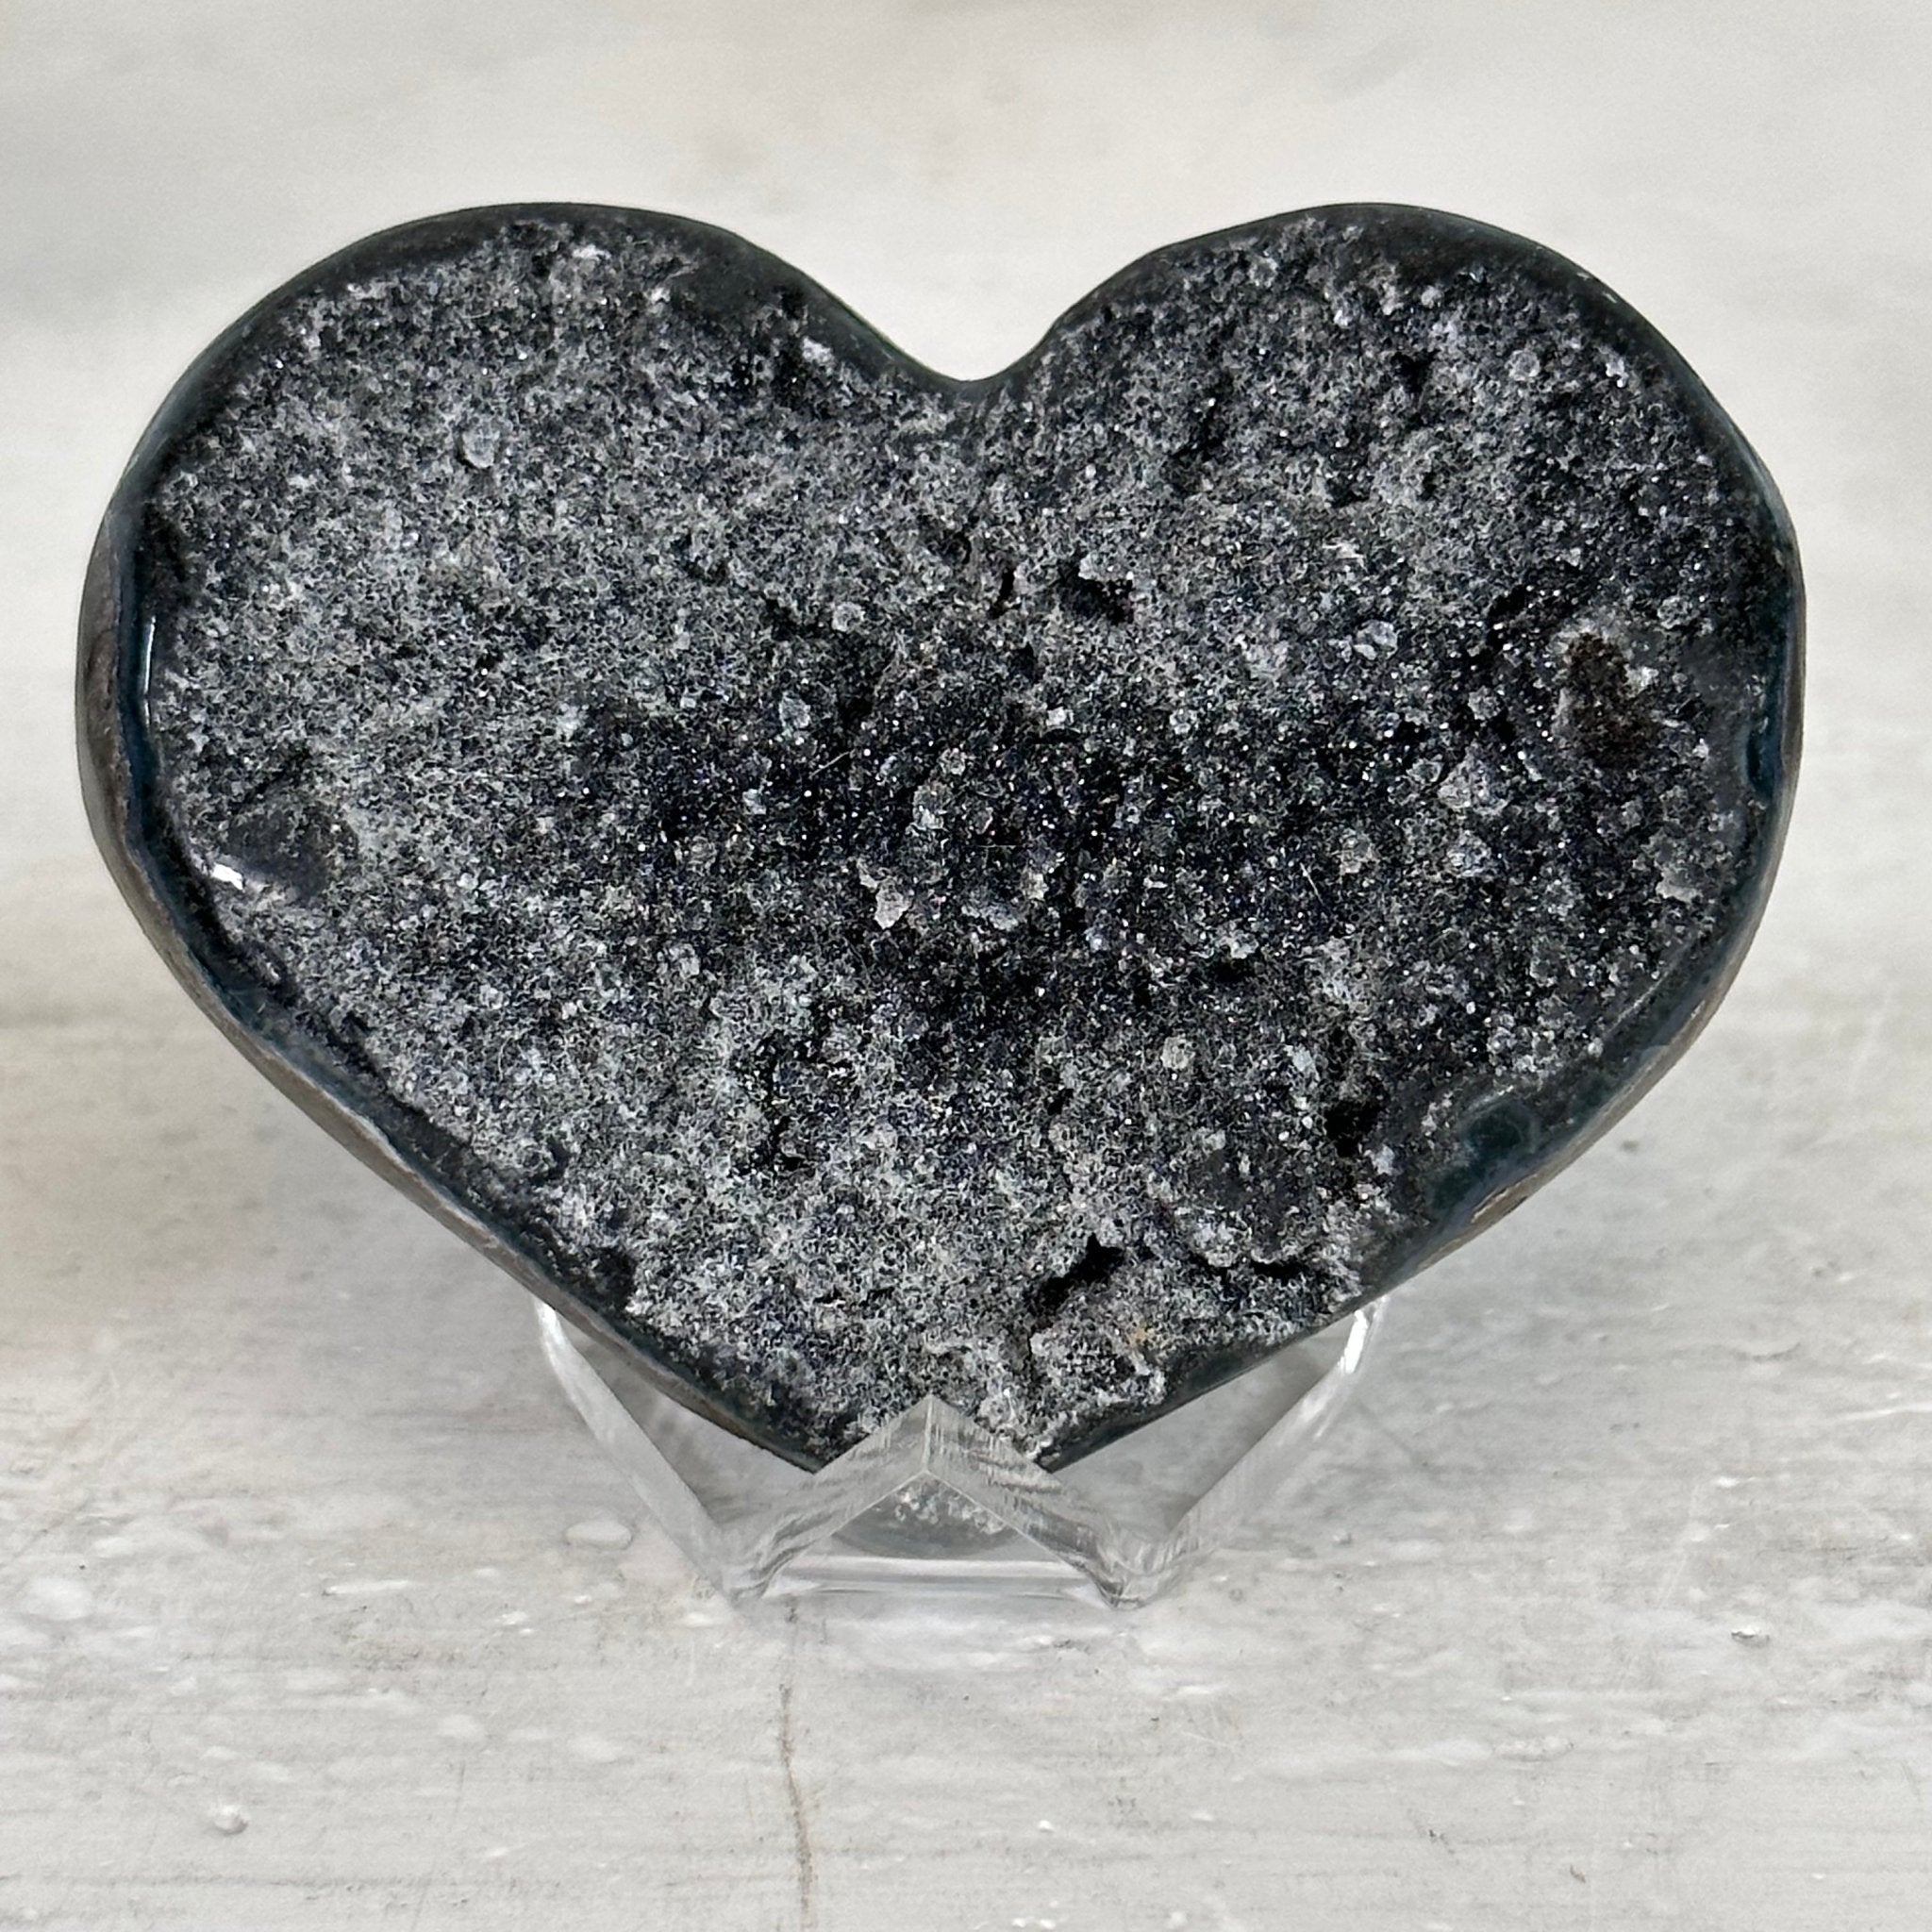 Extra Quality Amethyst Heart Geode on an Acrylic Stand, 0.15 lbs & 1.75" Tall #5462-0018 by Brazil Gems - Brazil GemsBrazil GemsExtra Quality Amethyst Heart Geode on an Acrylic Stand, 0.15 lbs & 1.75" Tall #5462-0018 by Brazil GemsHearts5462-0018